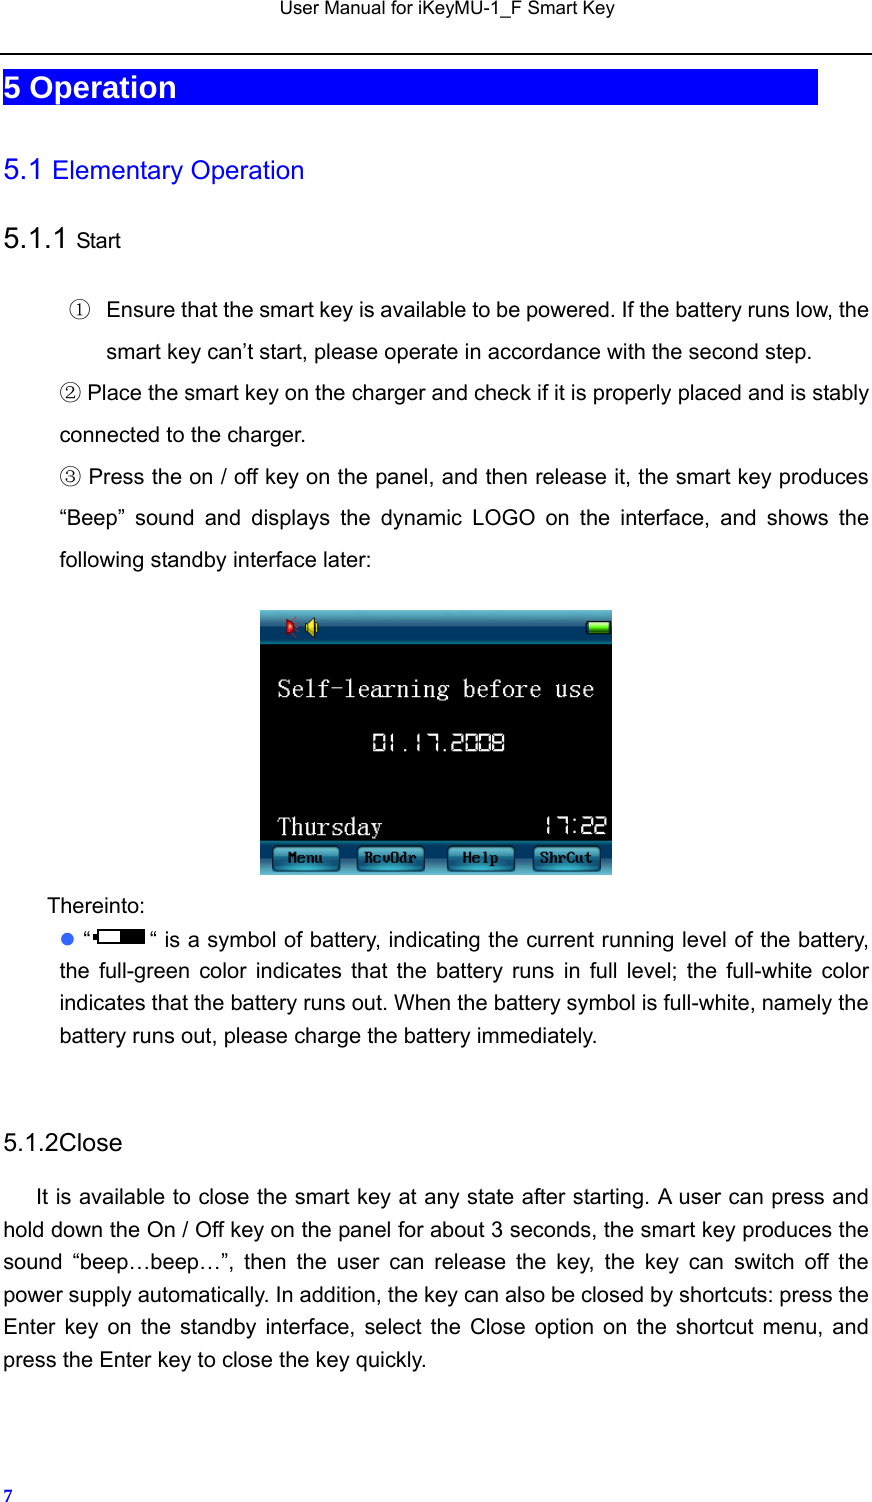   User Manual for iKeyMU-1_F Smart Key       75 Operation                                          5.1 Elementary Operation 5.1.1 Start ①  Ensure that the smart key is available to be powered. If the battery runs low, the smart key can’t start, please operate in accordance with the second step.  Place the smart key on the charger and check if it is properly placed and is stably ②connected to the charger.  Press the on / off ③key on the panel, and then release it, the smart key produces “Beep” sound and displays the dynamic LOGO on the interface, and shows the following standby interface later:   Thereinto:  “ “ is a symbol of battery, indicating the current running level of the battery, the full-green color indicates that the battery runs in full level; the full-white color indicates that the battery runs out. When the battery symbol is full-white, namely the battery runs out, please charge the battery immediately.  5.1.2Close       It is available to close the smart key at any state after starting. A user can press and hold down the On / Off key on the panel for about 3 seconds, the smart key produces the sound “beep…beep…”, then the user can release the key, the key can switch off the power supply automatically. In addition, the key can also be closed by shortcuts: press the Enter key on the standby interface, select the Close option on the shortcut menu, and press the Enter key to close the key quickly. 